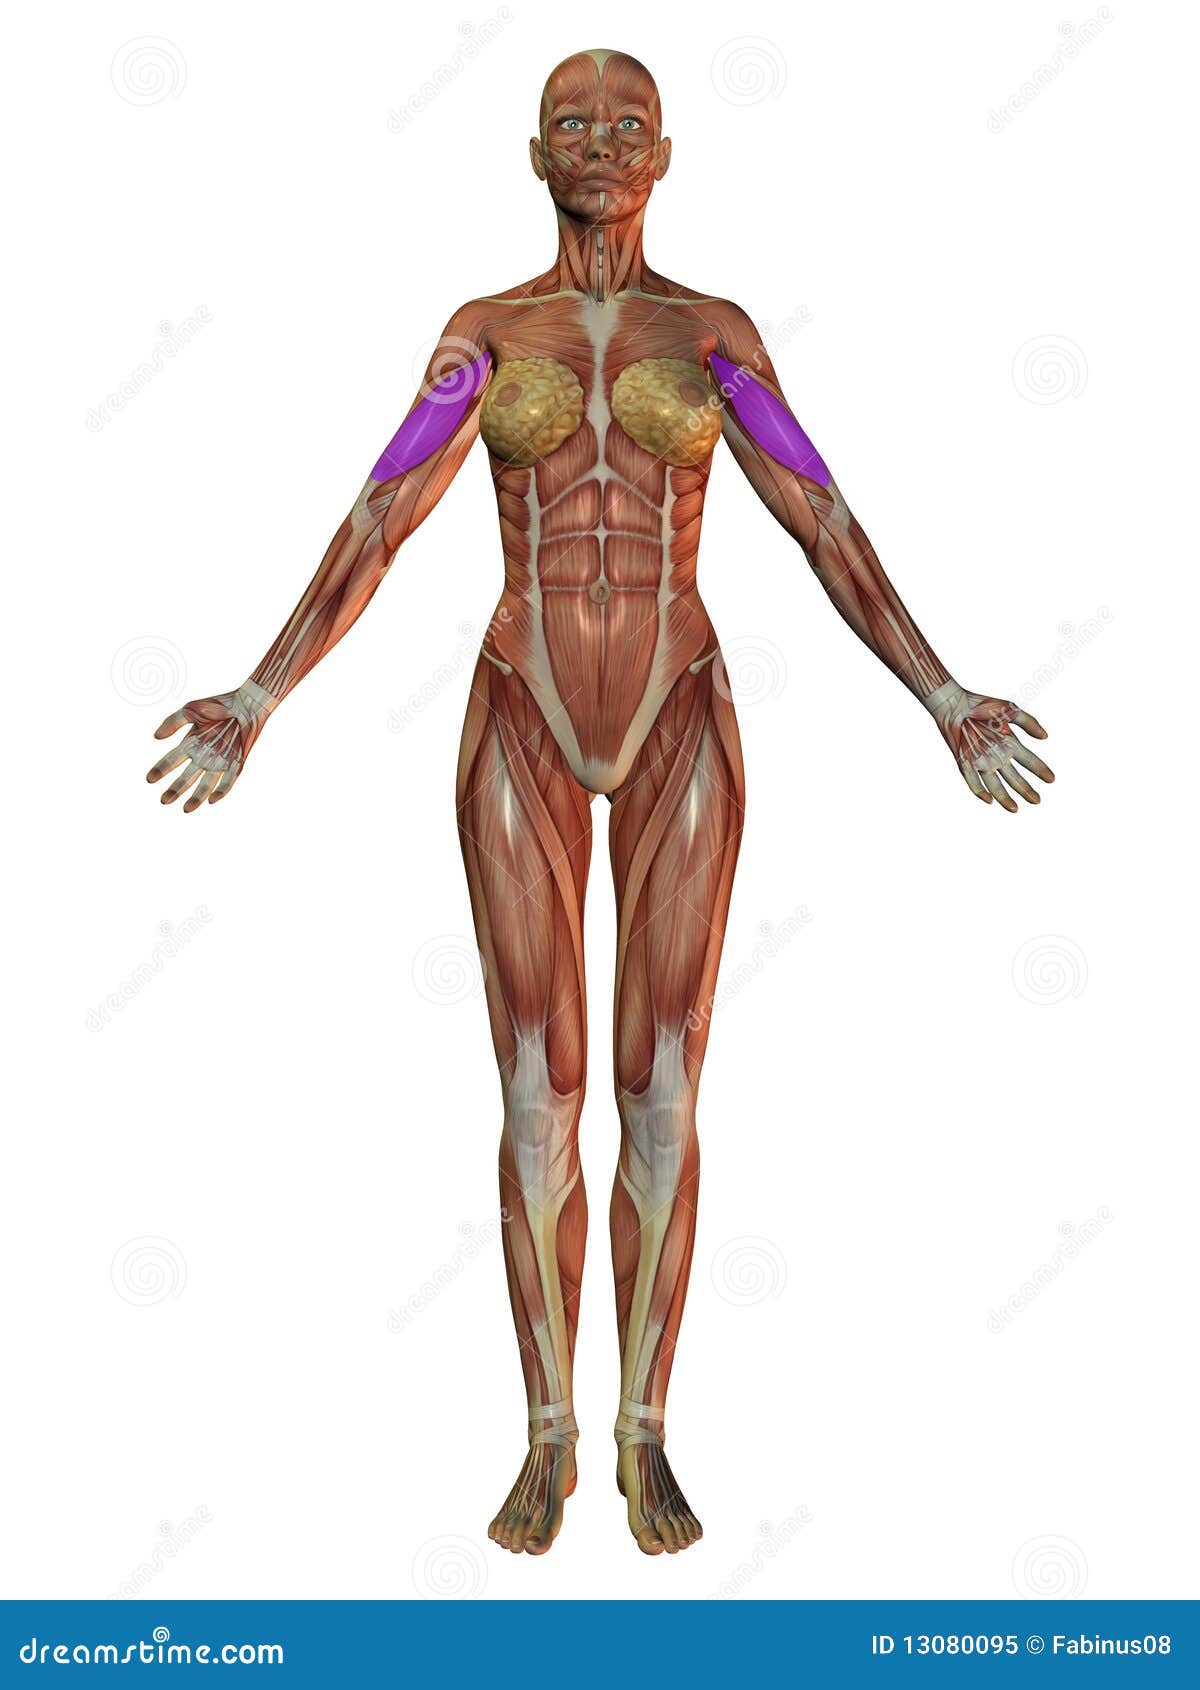 Woman anatomical body stock illustration. Image of system - 13080095